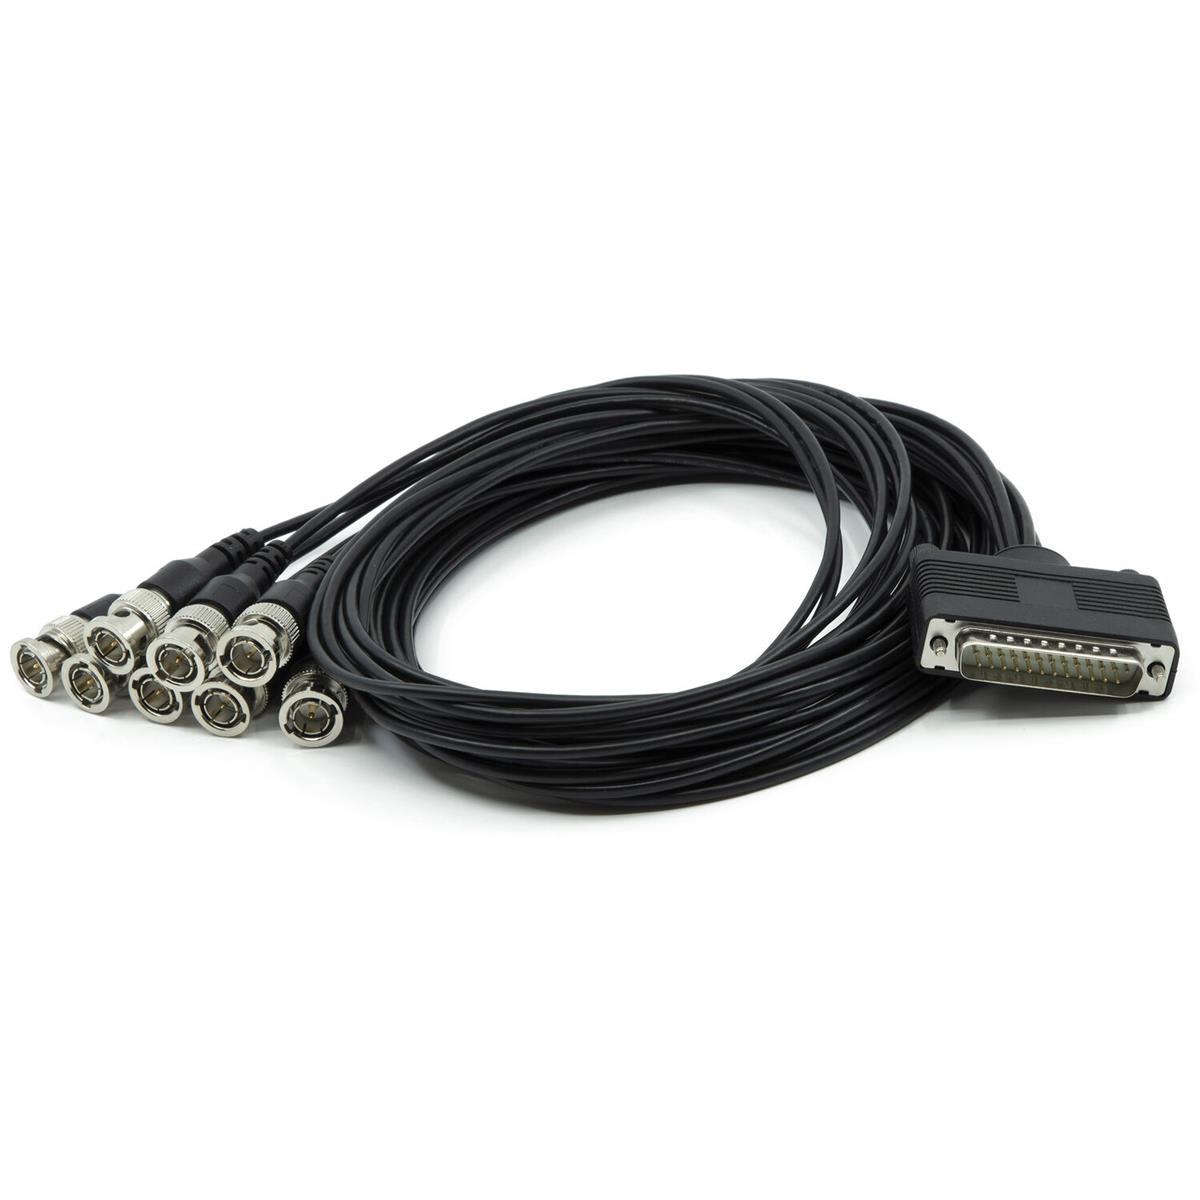 Image of AJA 12G-AM-8BNC-CBL Breakout Cable for AES Mini-Converter